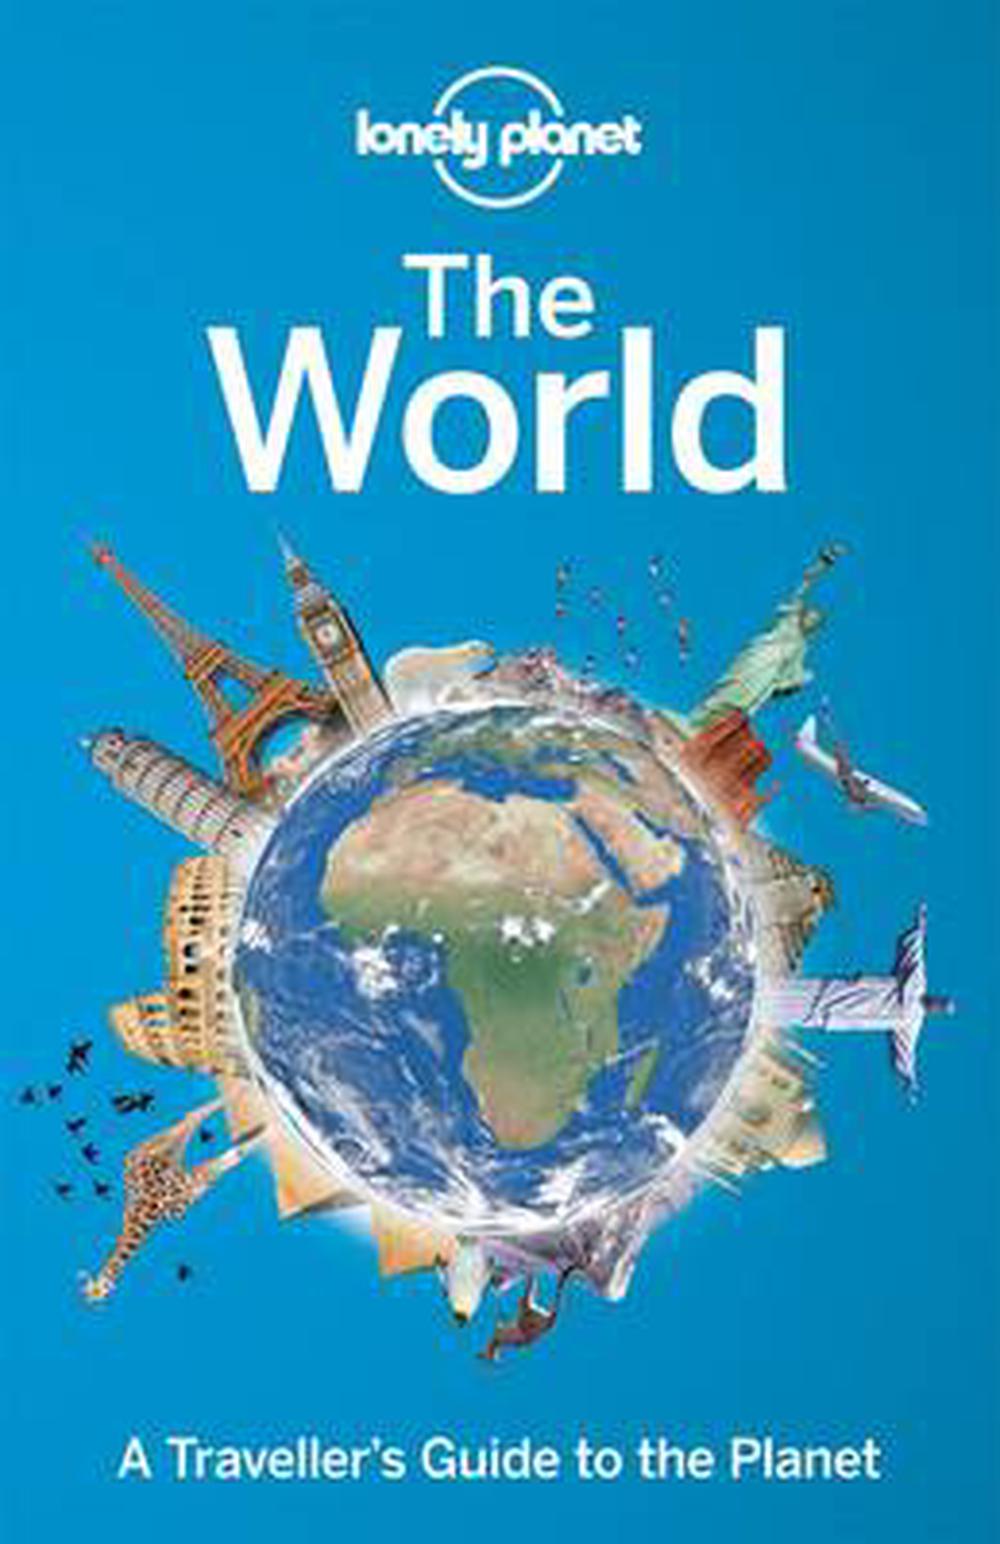 Lonely Planet the World by Lonely Planet, Paperback, 9781743600658 ...